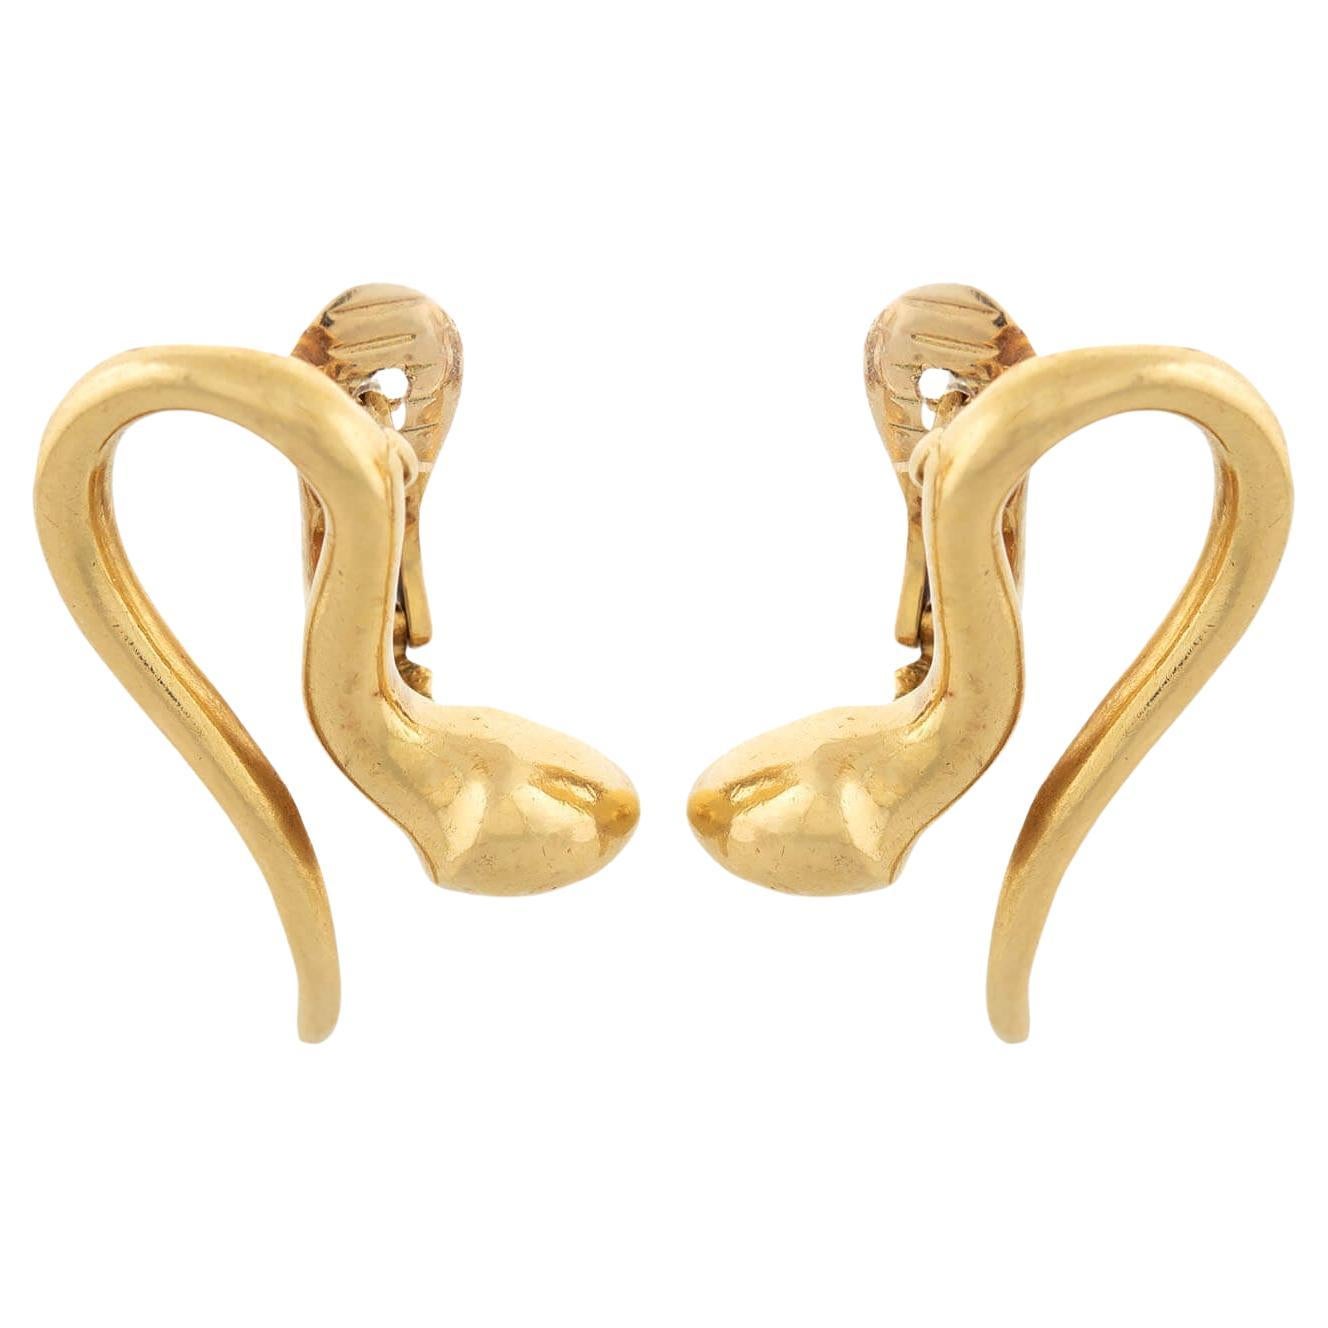 LALAOUNIS Estate 18k Gold Abstract Snake Earrings